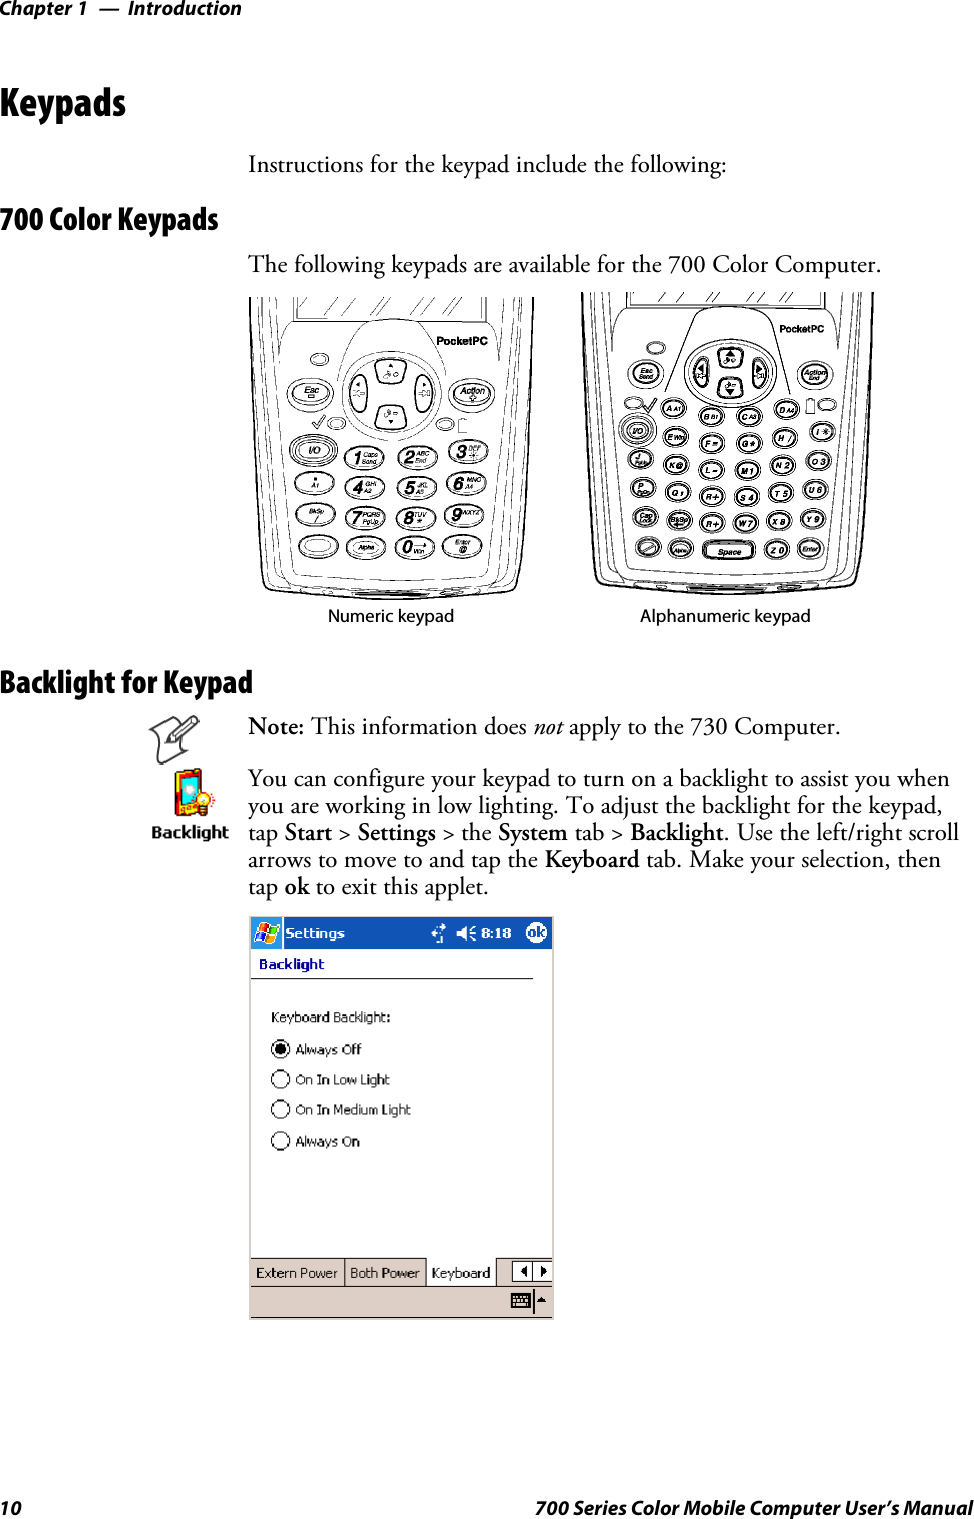 IntroductionChapter —110 700 Series Color Mobile Computer User’s ManualKeypadsInstructions for the keypad include the following:700 Color KeypadsThe following keypads are available for the 700 Color Computer.Numeric keypad Alphanumeric keypadBacklight for KeypadNote: This information does not apply to the 730 Computer.You can configure your keypad to turn on a backlight to assist you whenyou are working in low lighting. To adjust the backlight for the keypad,tap Start &gt;Settings &gt;theSystem tab &gt; Backlight. Use the left/right scrollarrows to move to and tap the Keyboard tab. Make your selection, thentap ok to exit this applet.